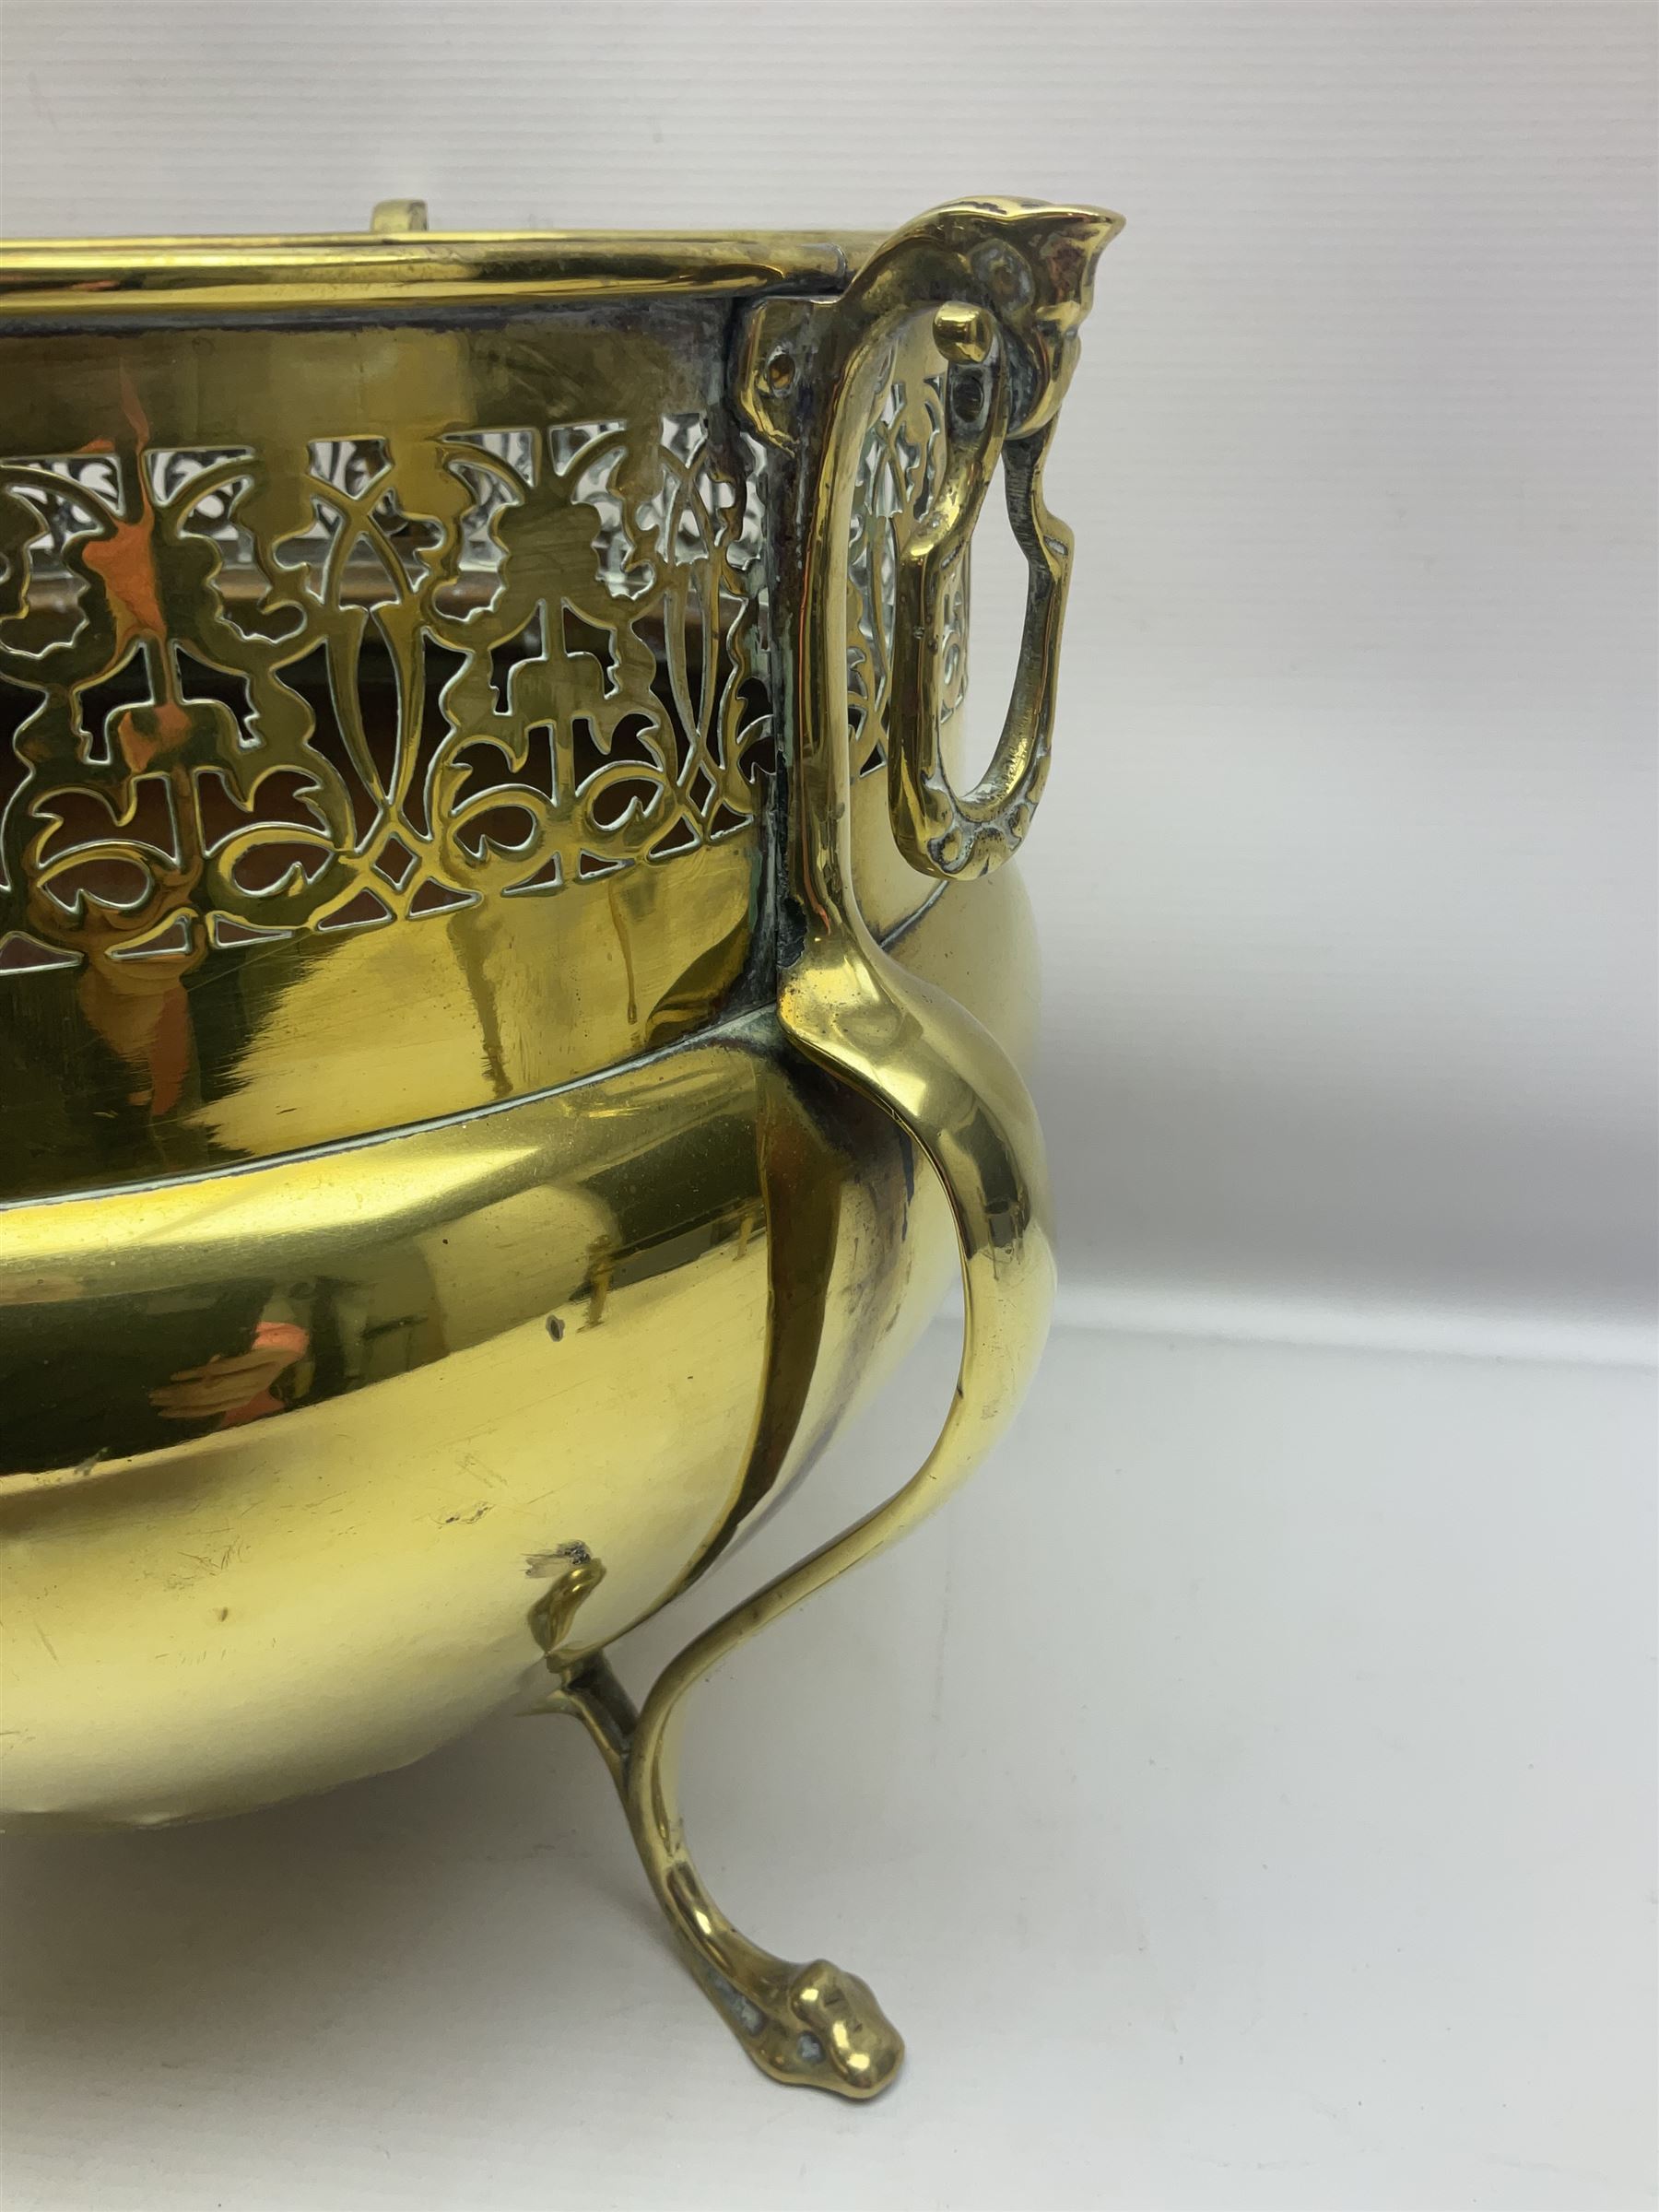 Early 20th century brass coal bucket with pierced sides - Image 5 of 13